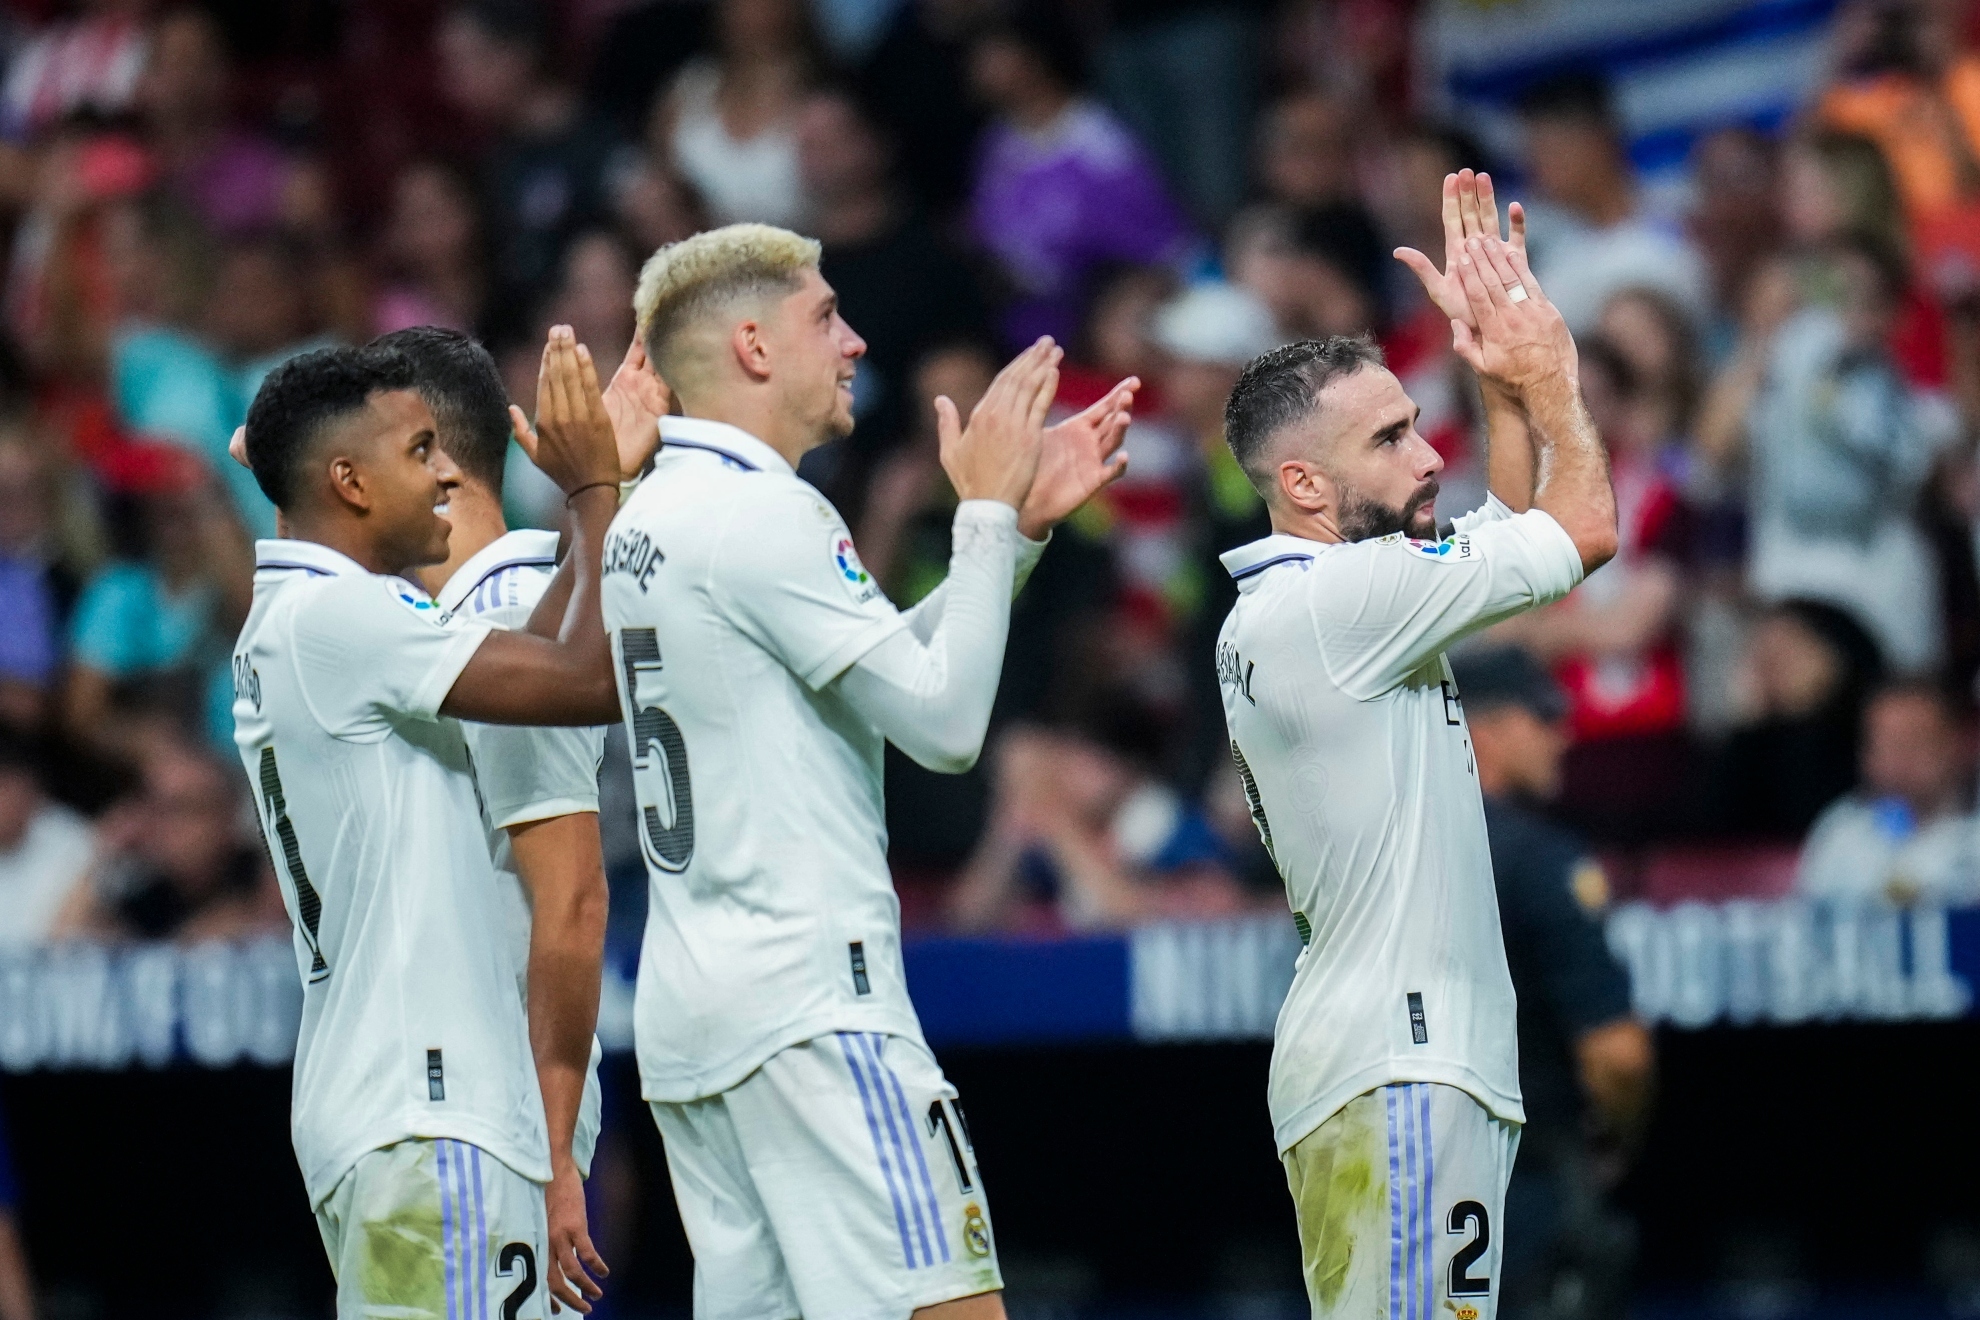 Real Madrid players applaud to supporters at the end of the Spanish La Liga soccer match between Atletico Madrid and Real Madrid at the Wanda Metropolitano stadium in Madrid, Spain, Sunday, Sept. 18, 2022. Real Madrid won 2-1. / AP